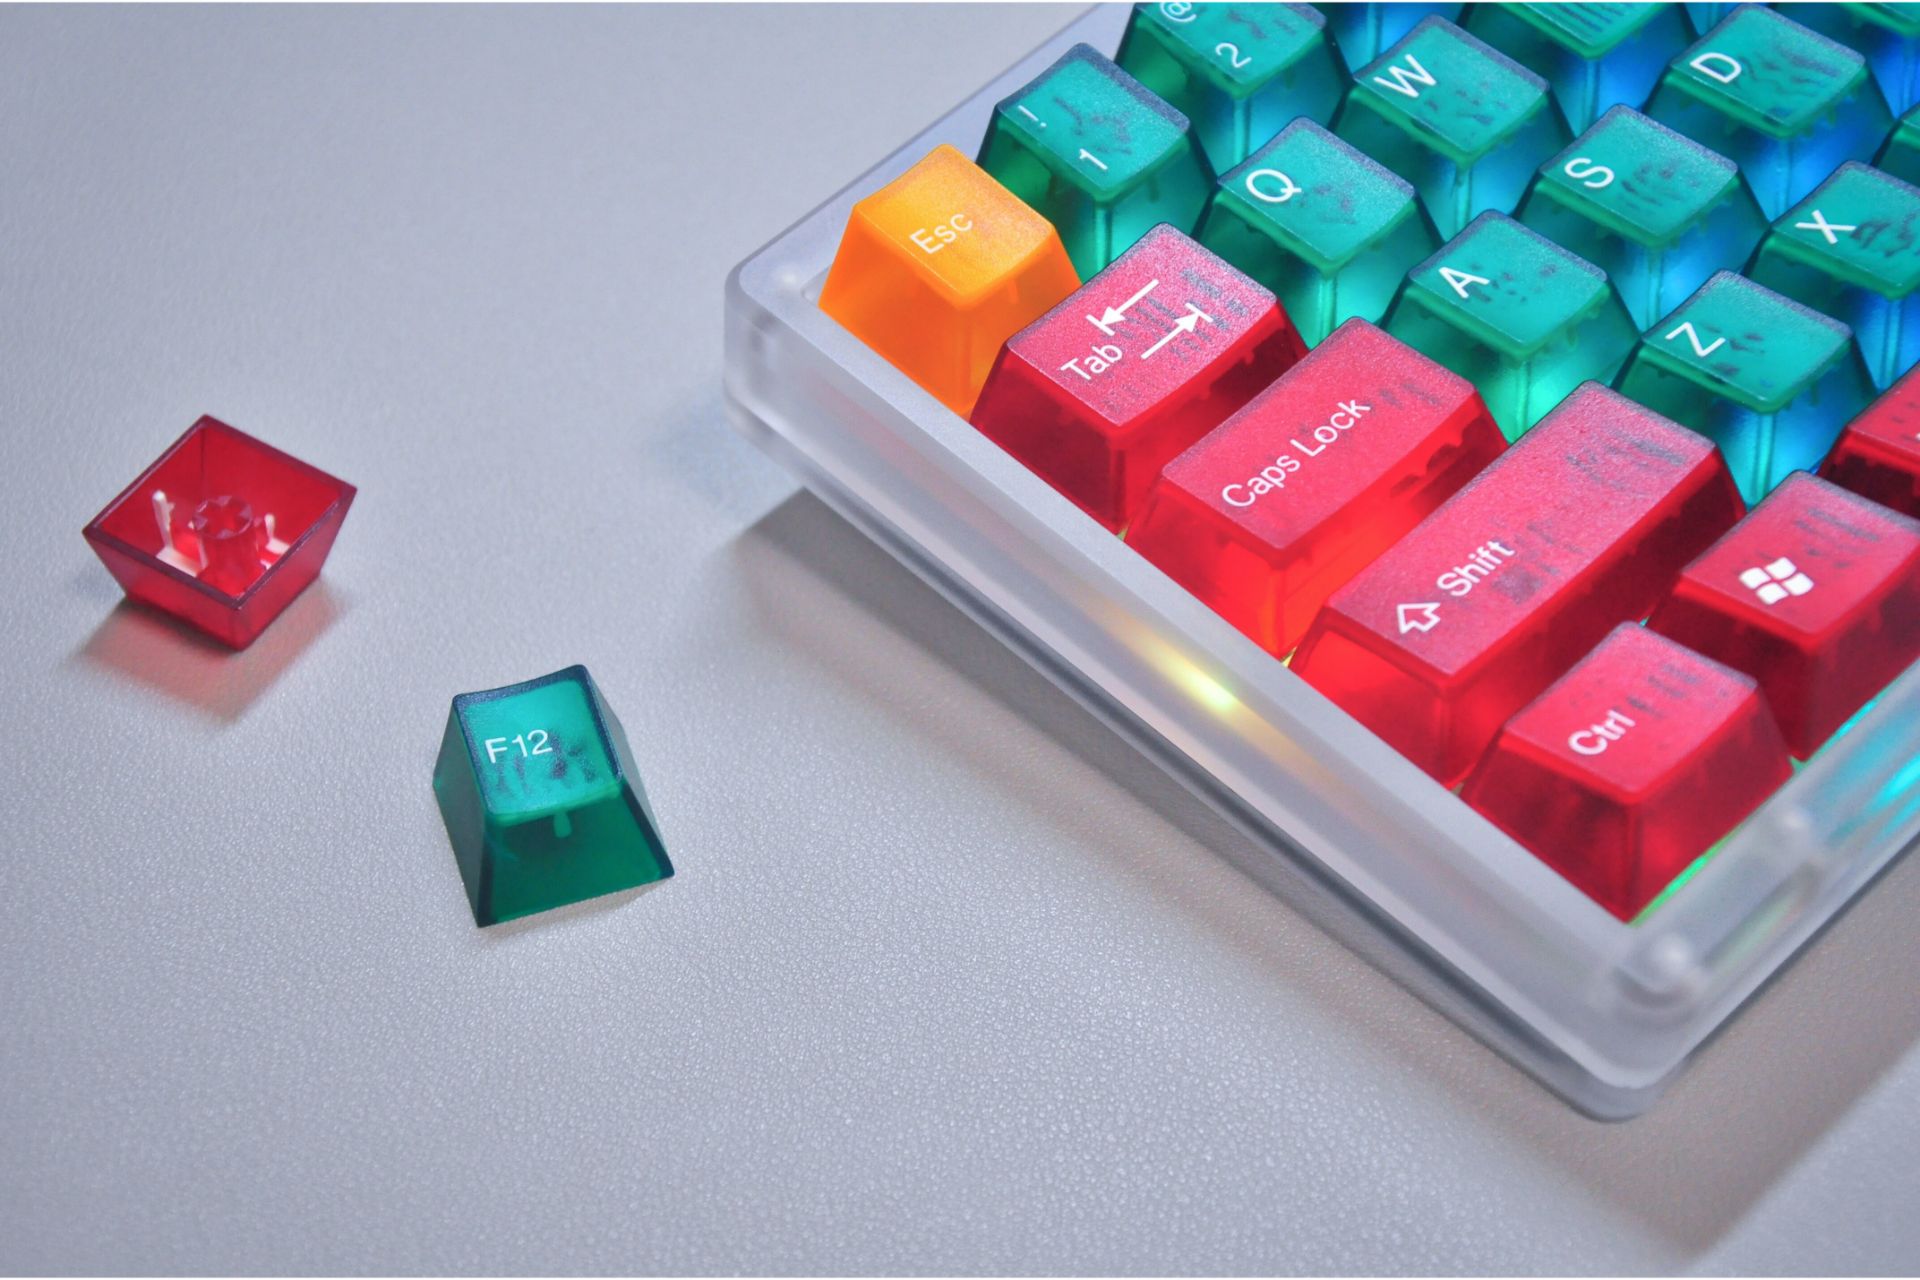 5 Reasons Why Mechanical Keyboards Are Better Than Regular Keyboards